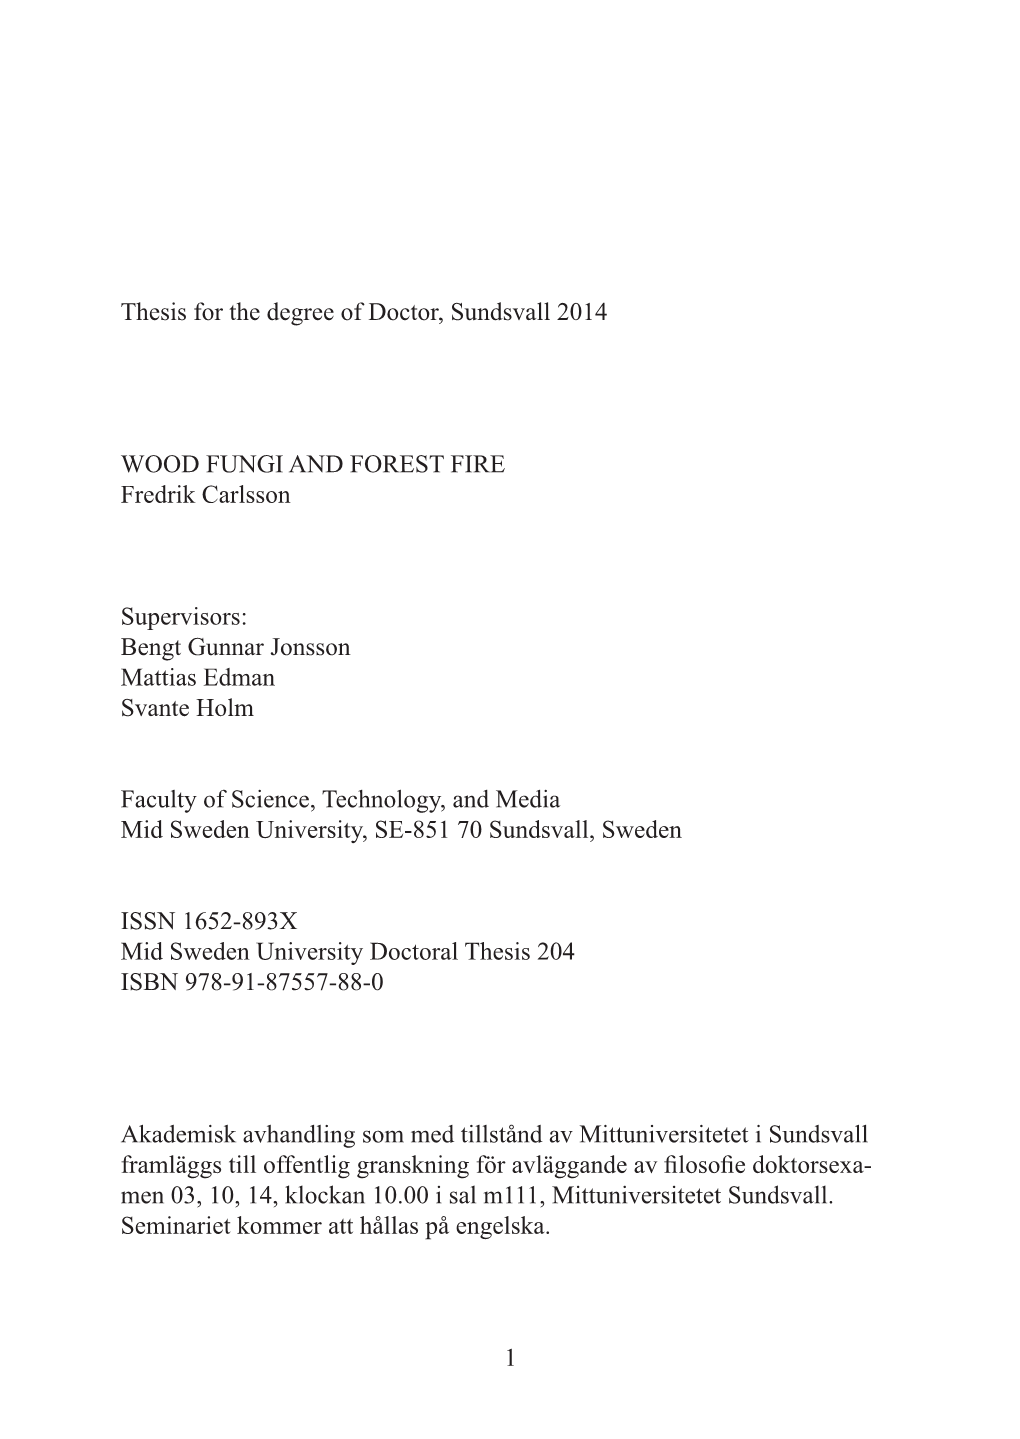 Thesis for the Degree of Doctor, Sundsvall 2014